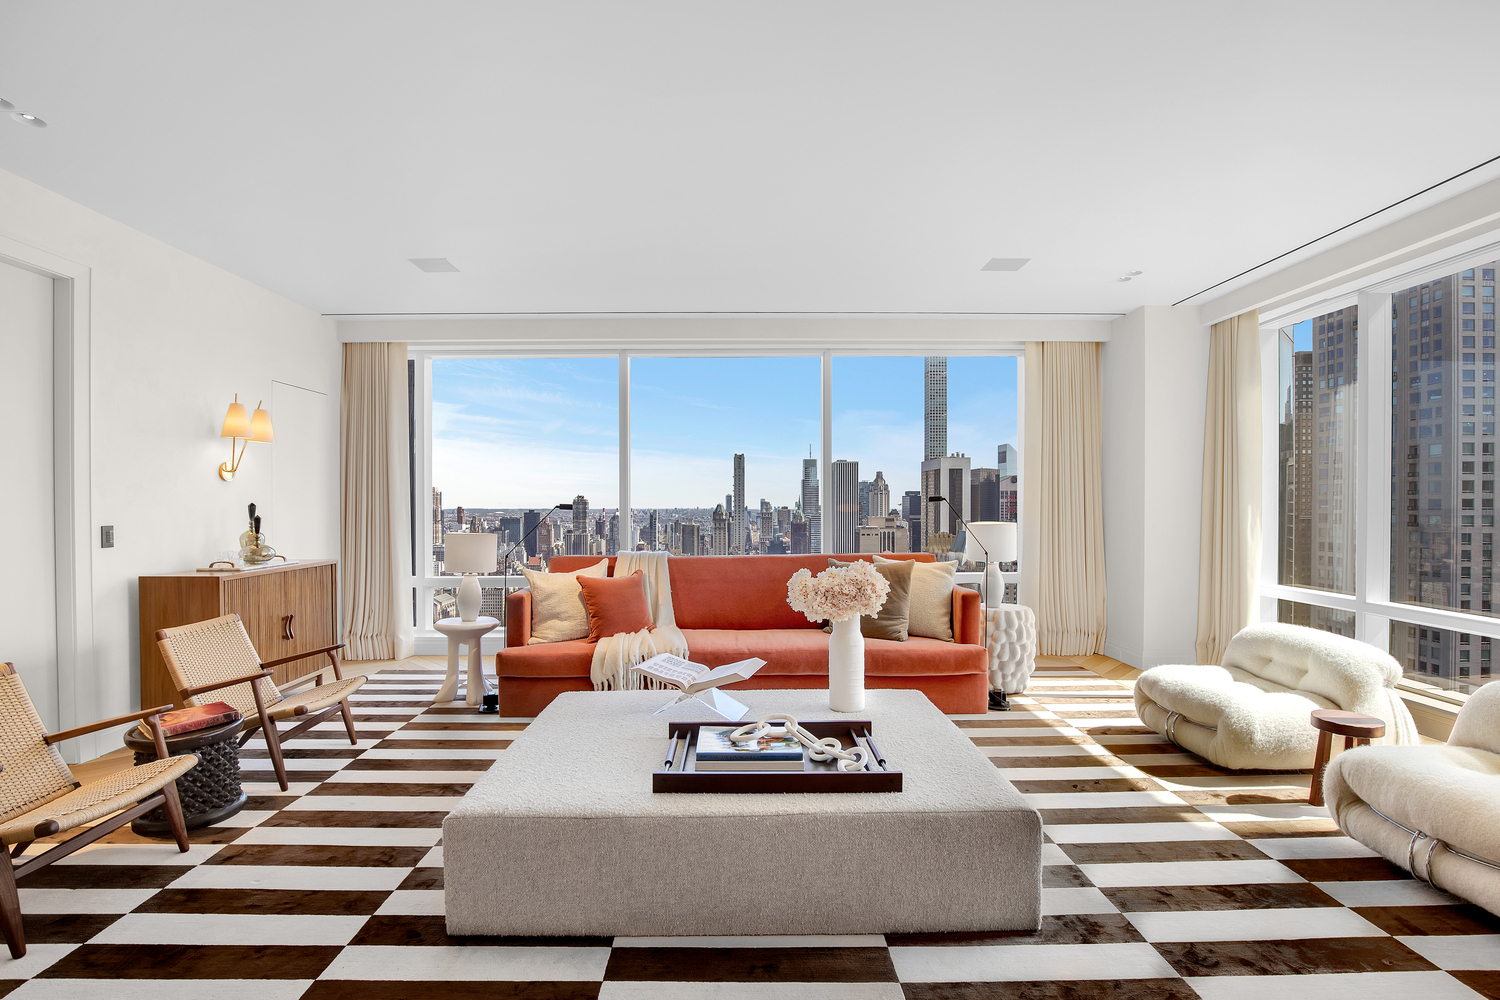 1 Central Park 47Bc, Lincoln Square, Upper West Side, NYC - 5 Bedrooms  6.5 Bathrooms  10 Rooms - 